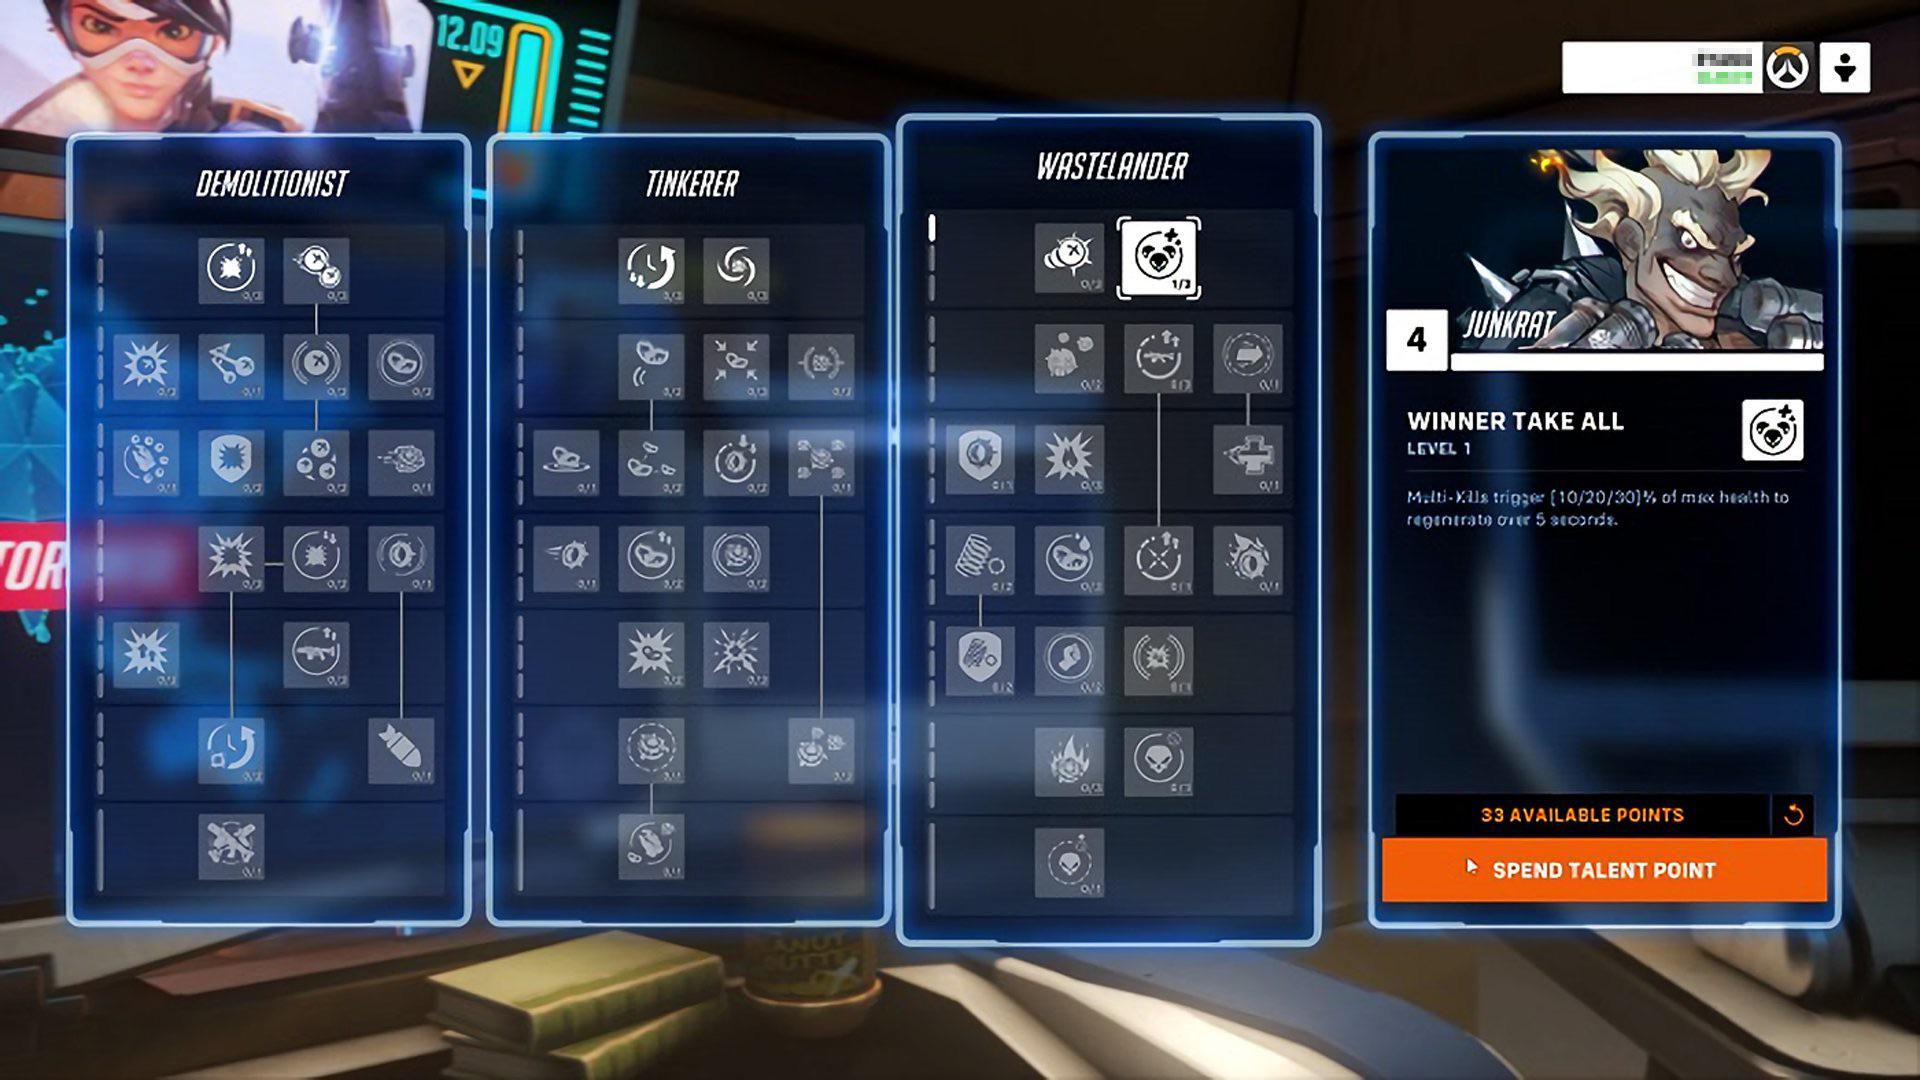 Junkrat's skill tree in Overwatch 2 PVE missions before it got scrapped during development.